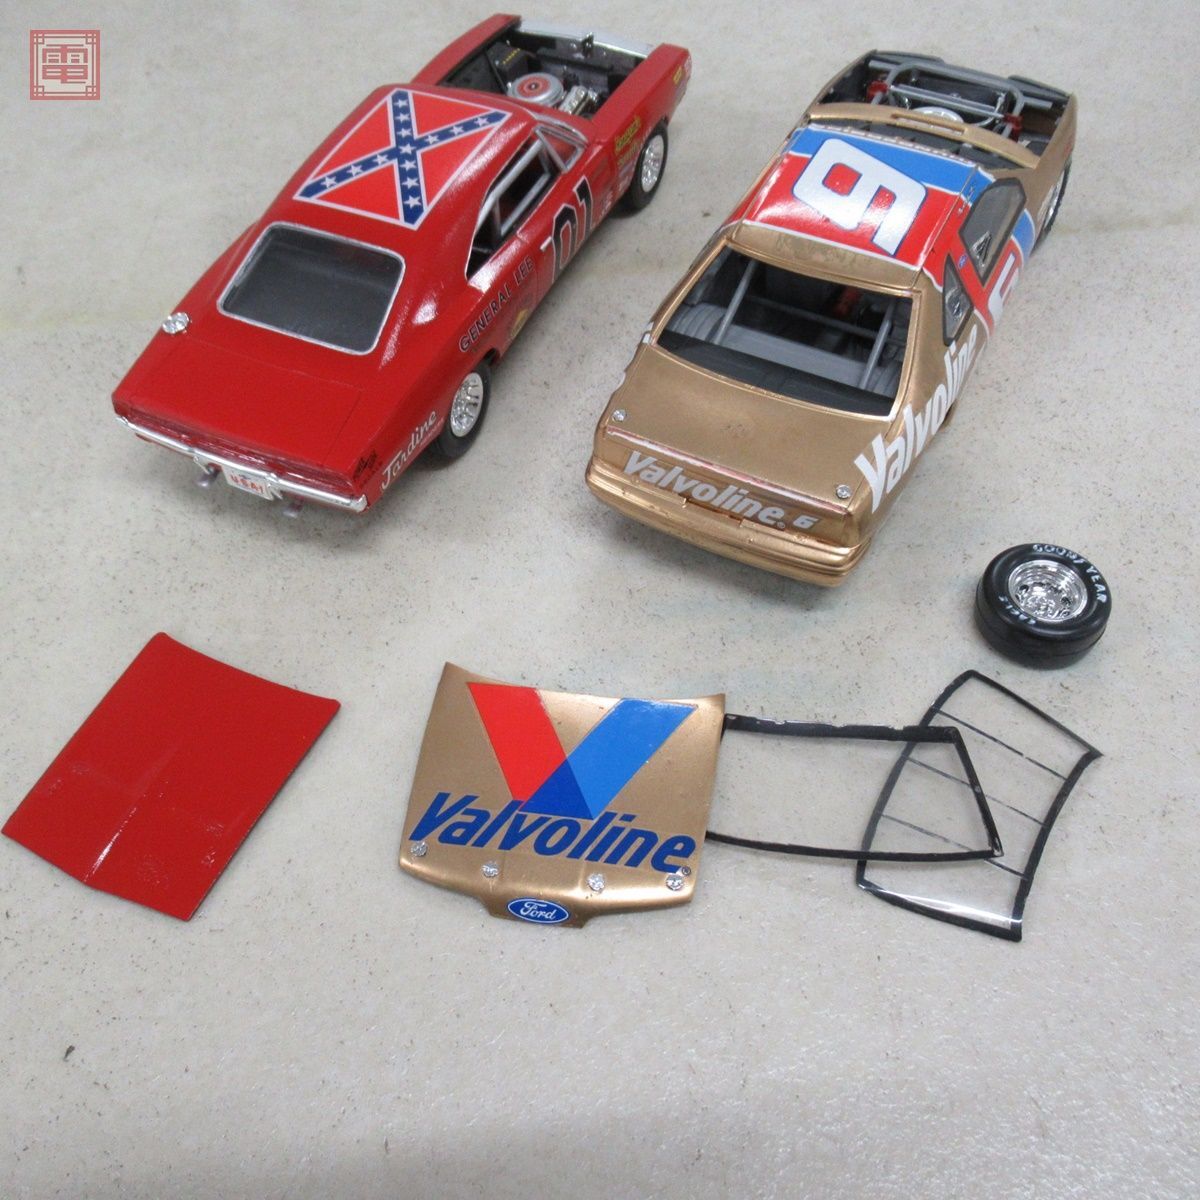  made goods Mebius model other 1/25 etc. plymouth Golden Commandos/ Oldsmobile 442 Benny Parsons other total 8 point set damage have Junk [20